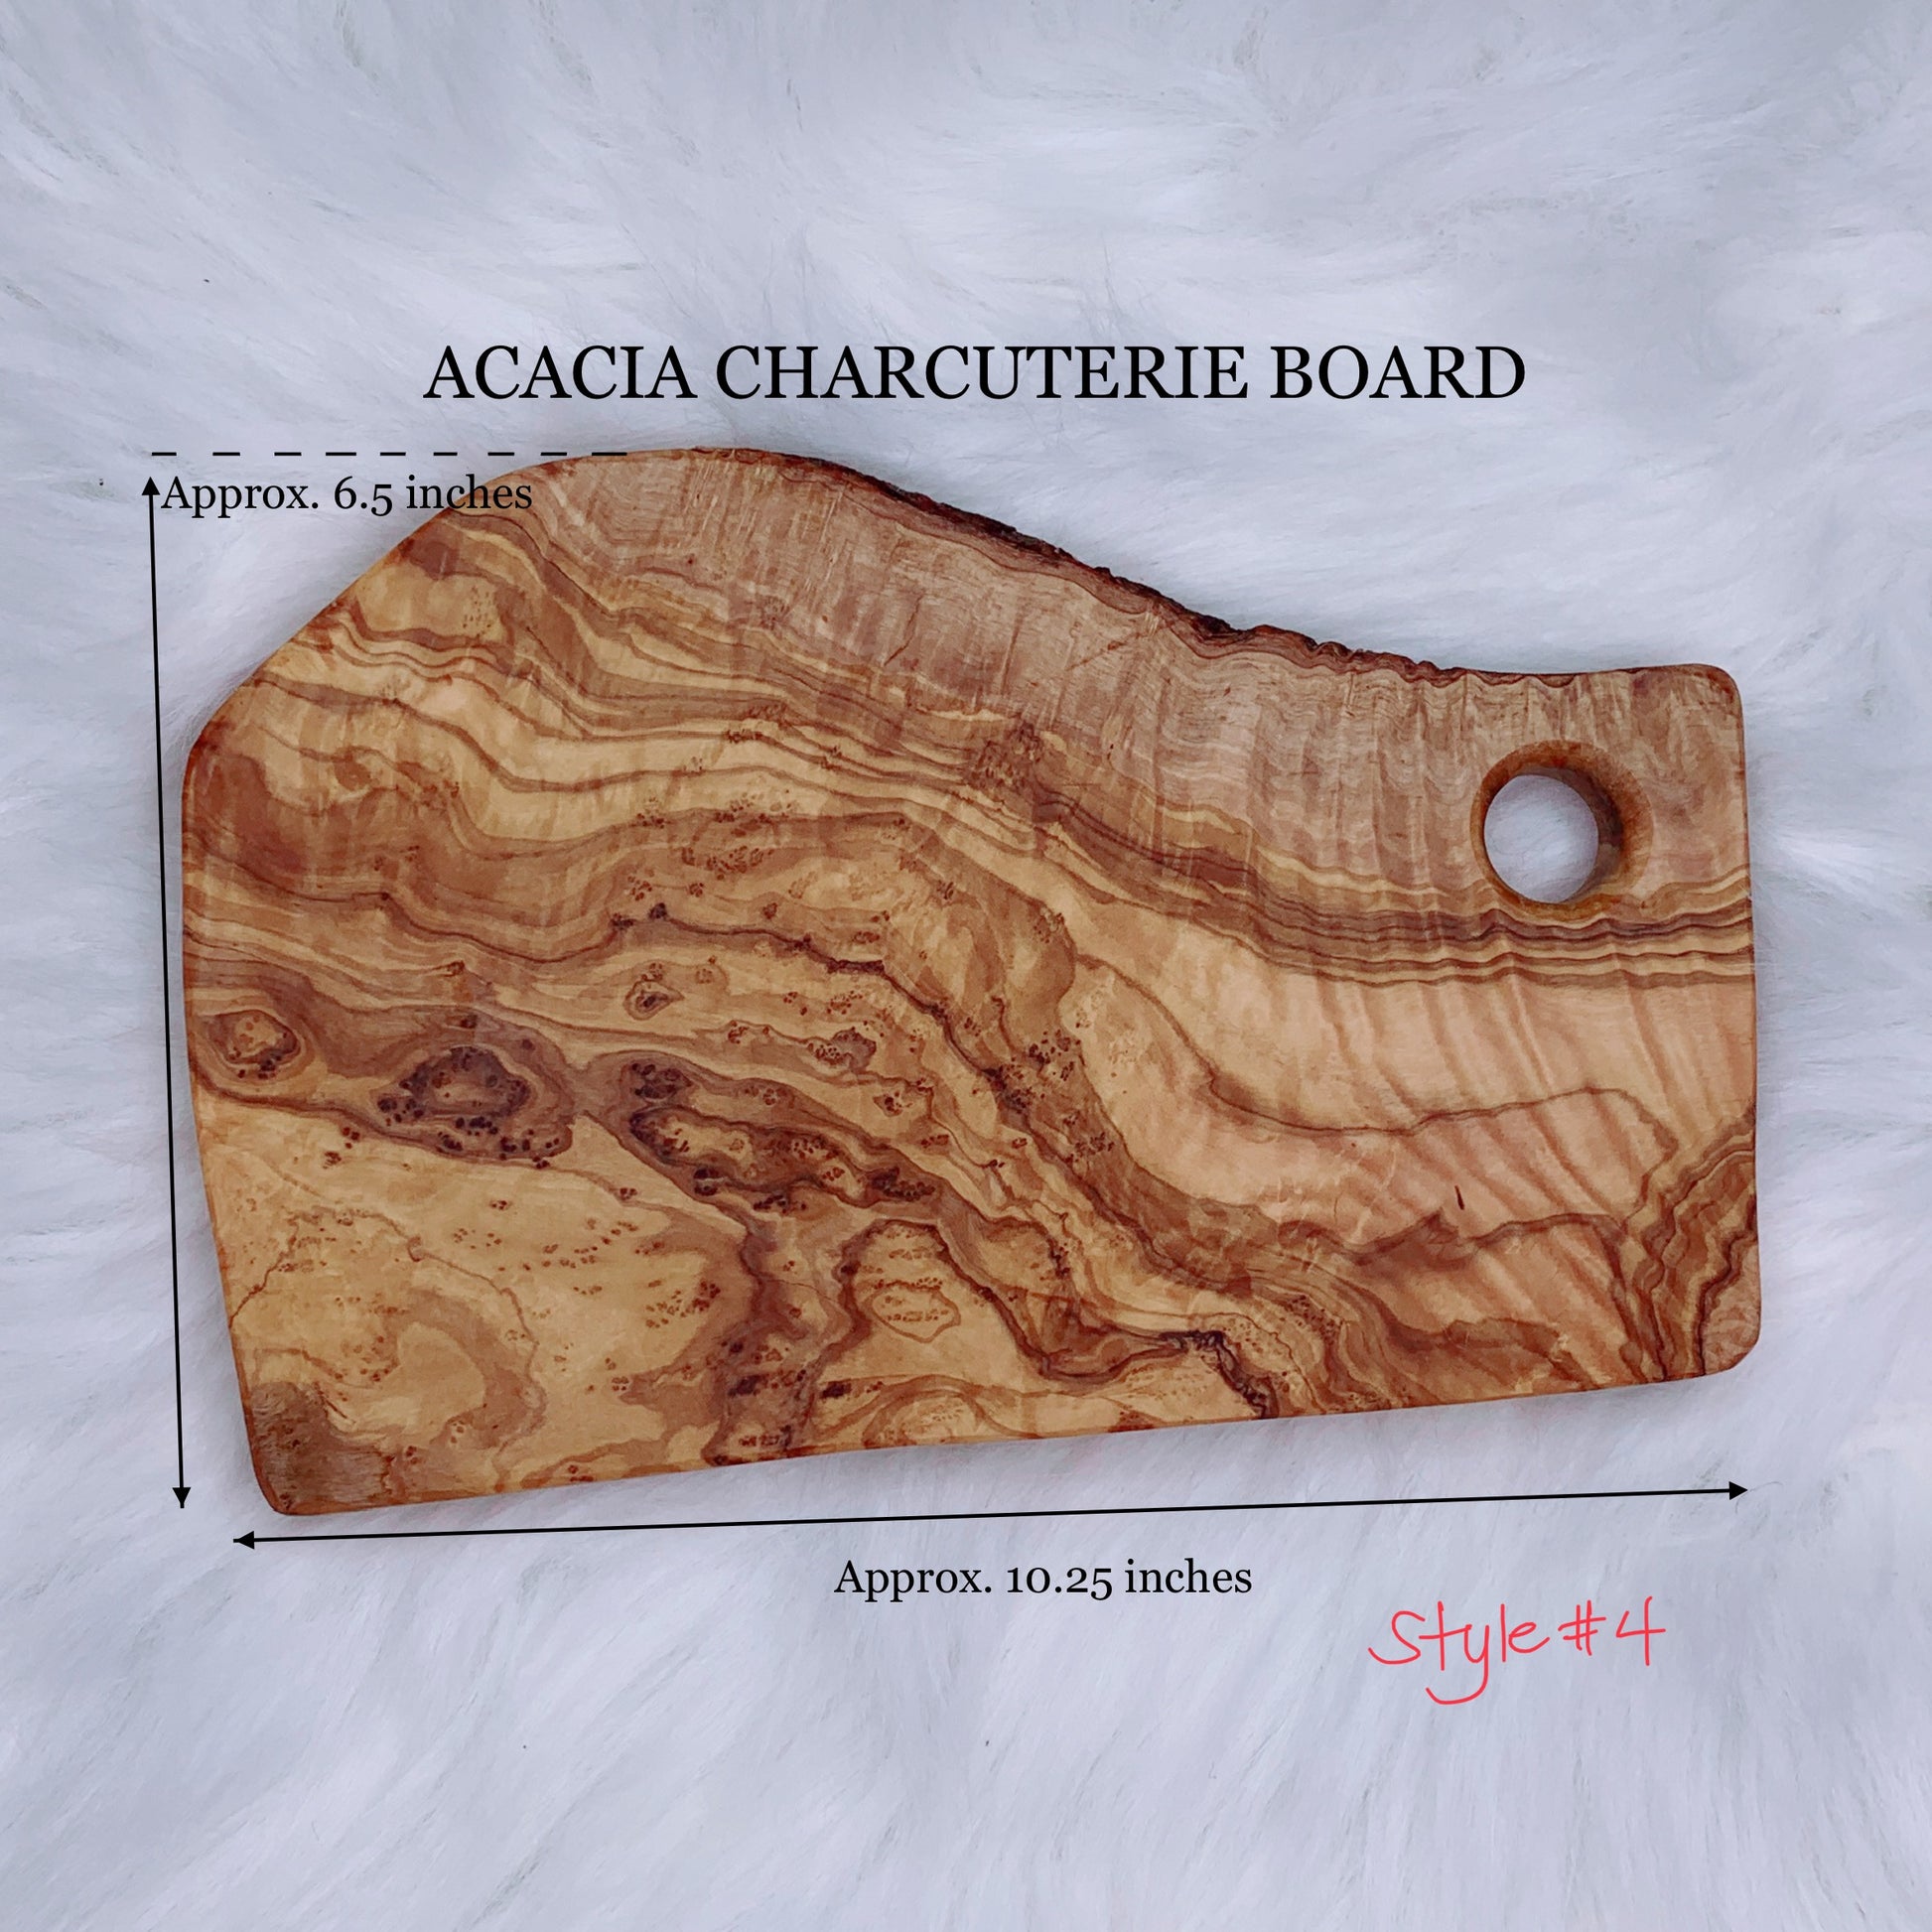 Acacia Charcuterie Board for engraving style 4